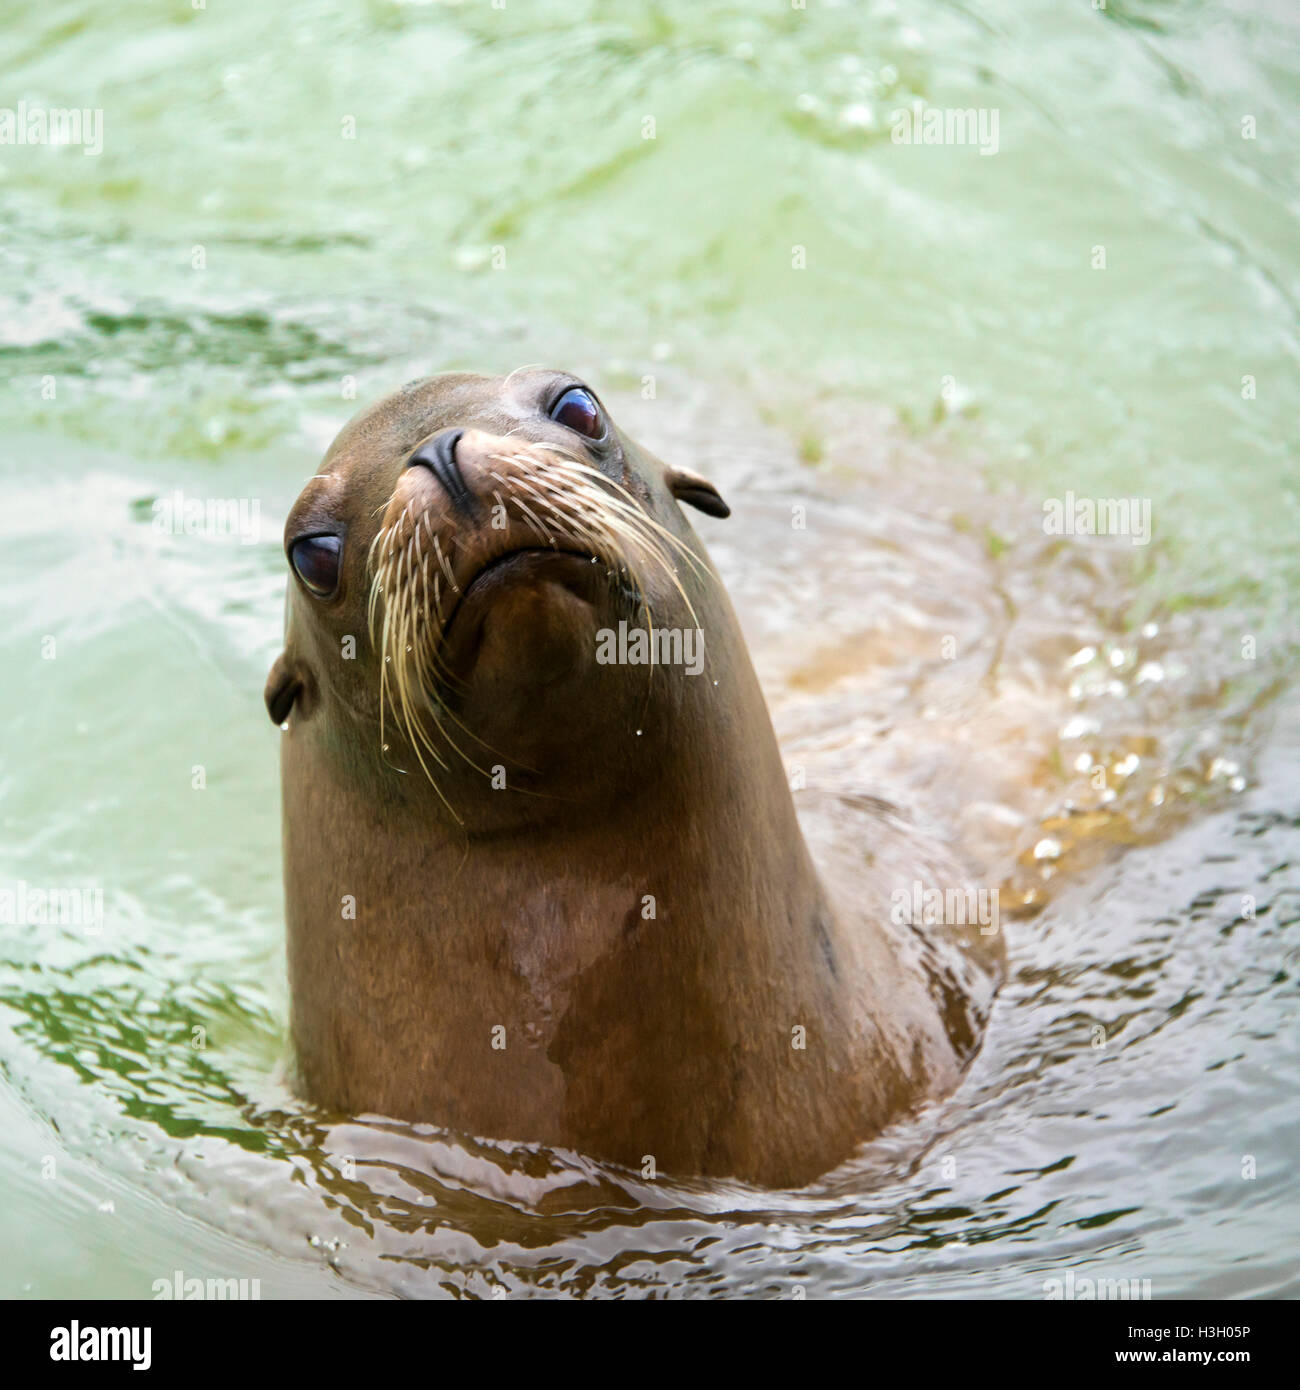 Square close up of a fully grown female Californian seal lion. Stock Photo